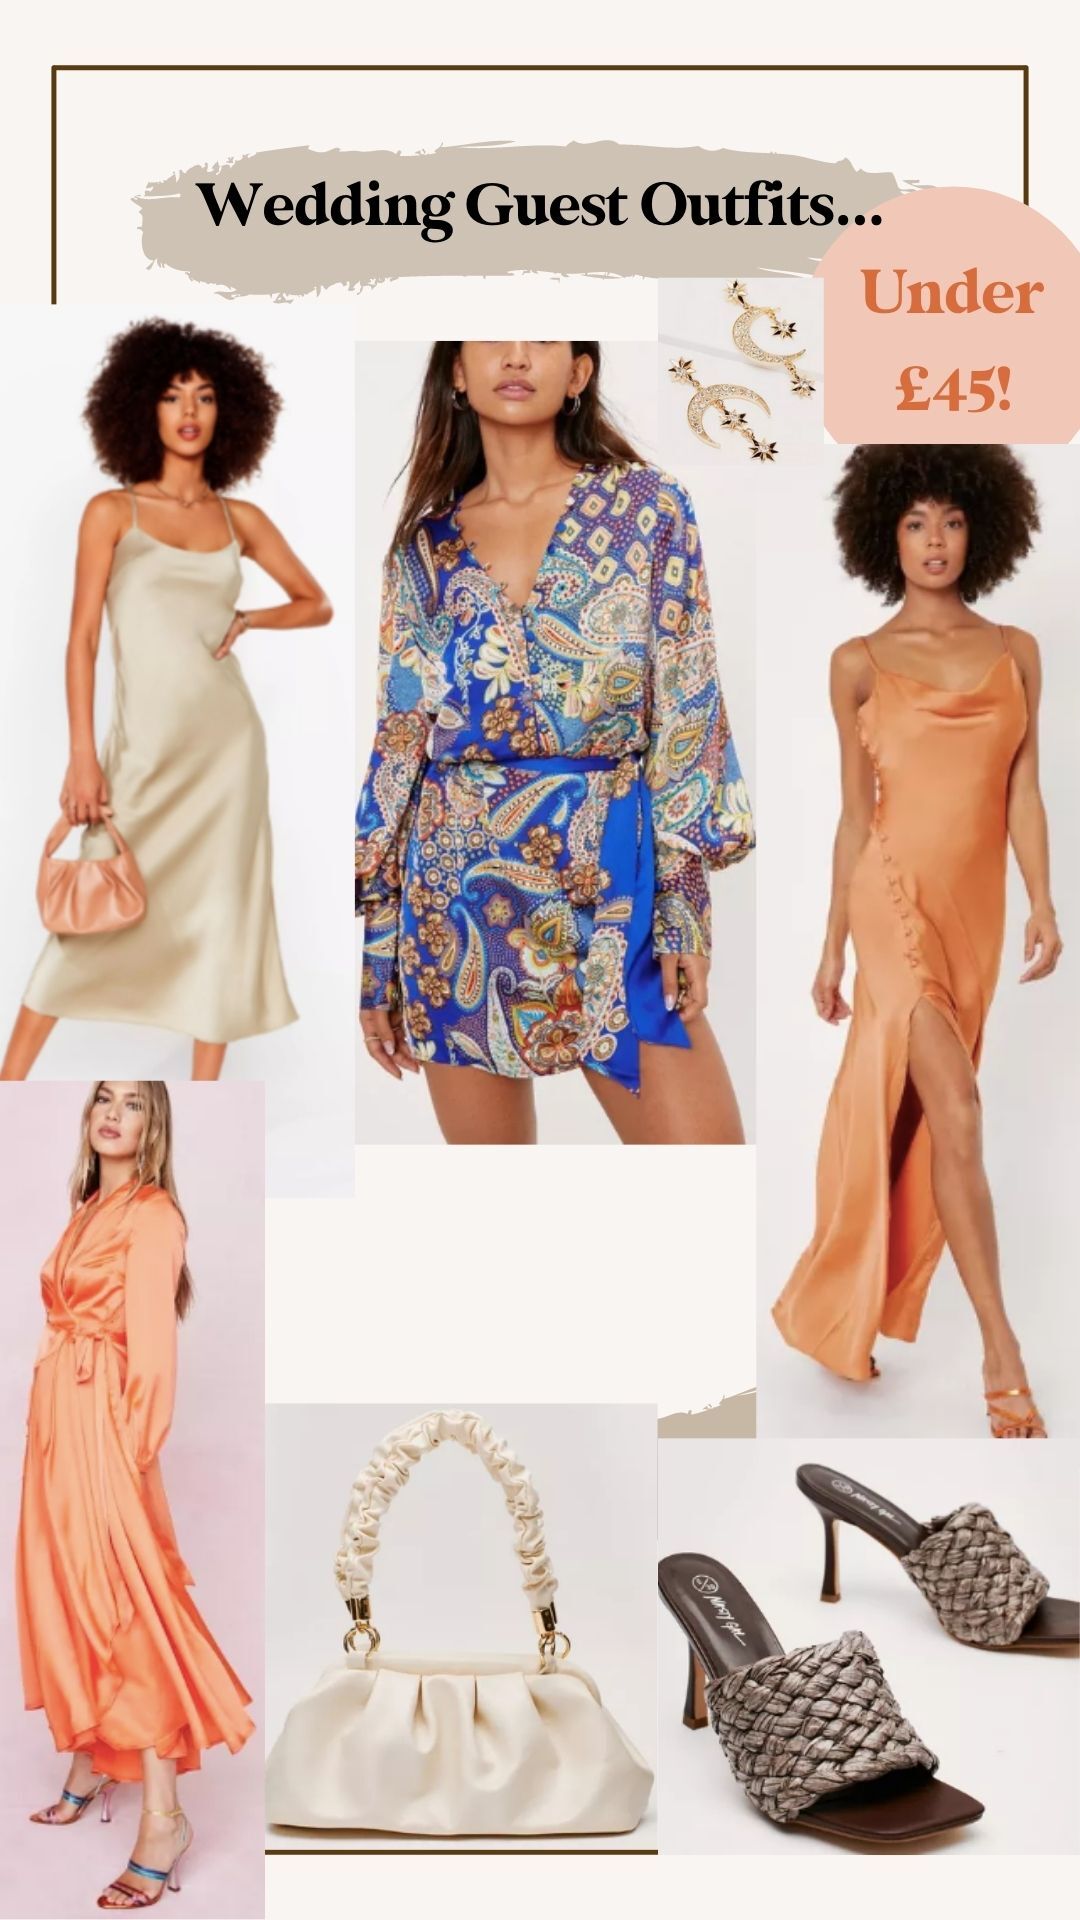 Wedding Guests Outfits Under £45